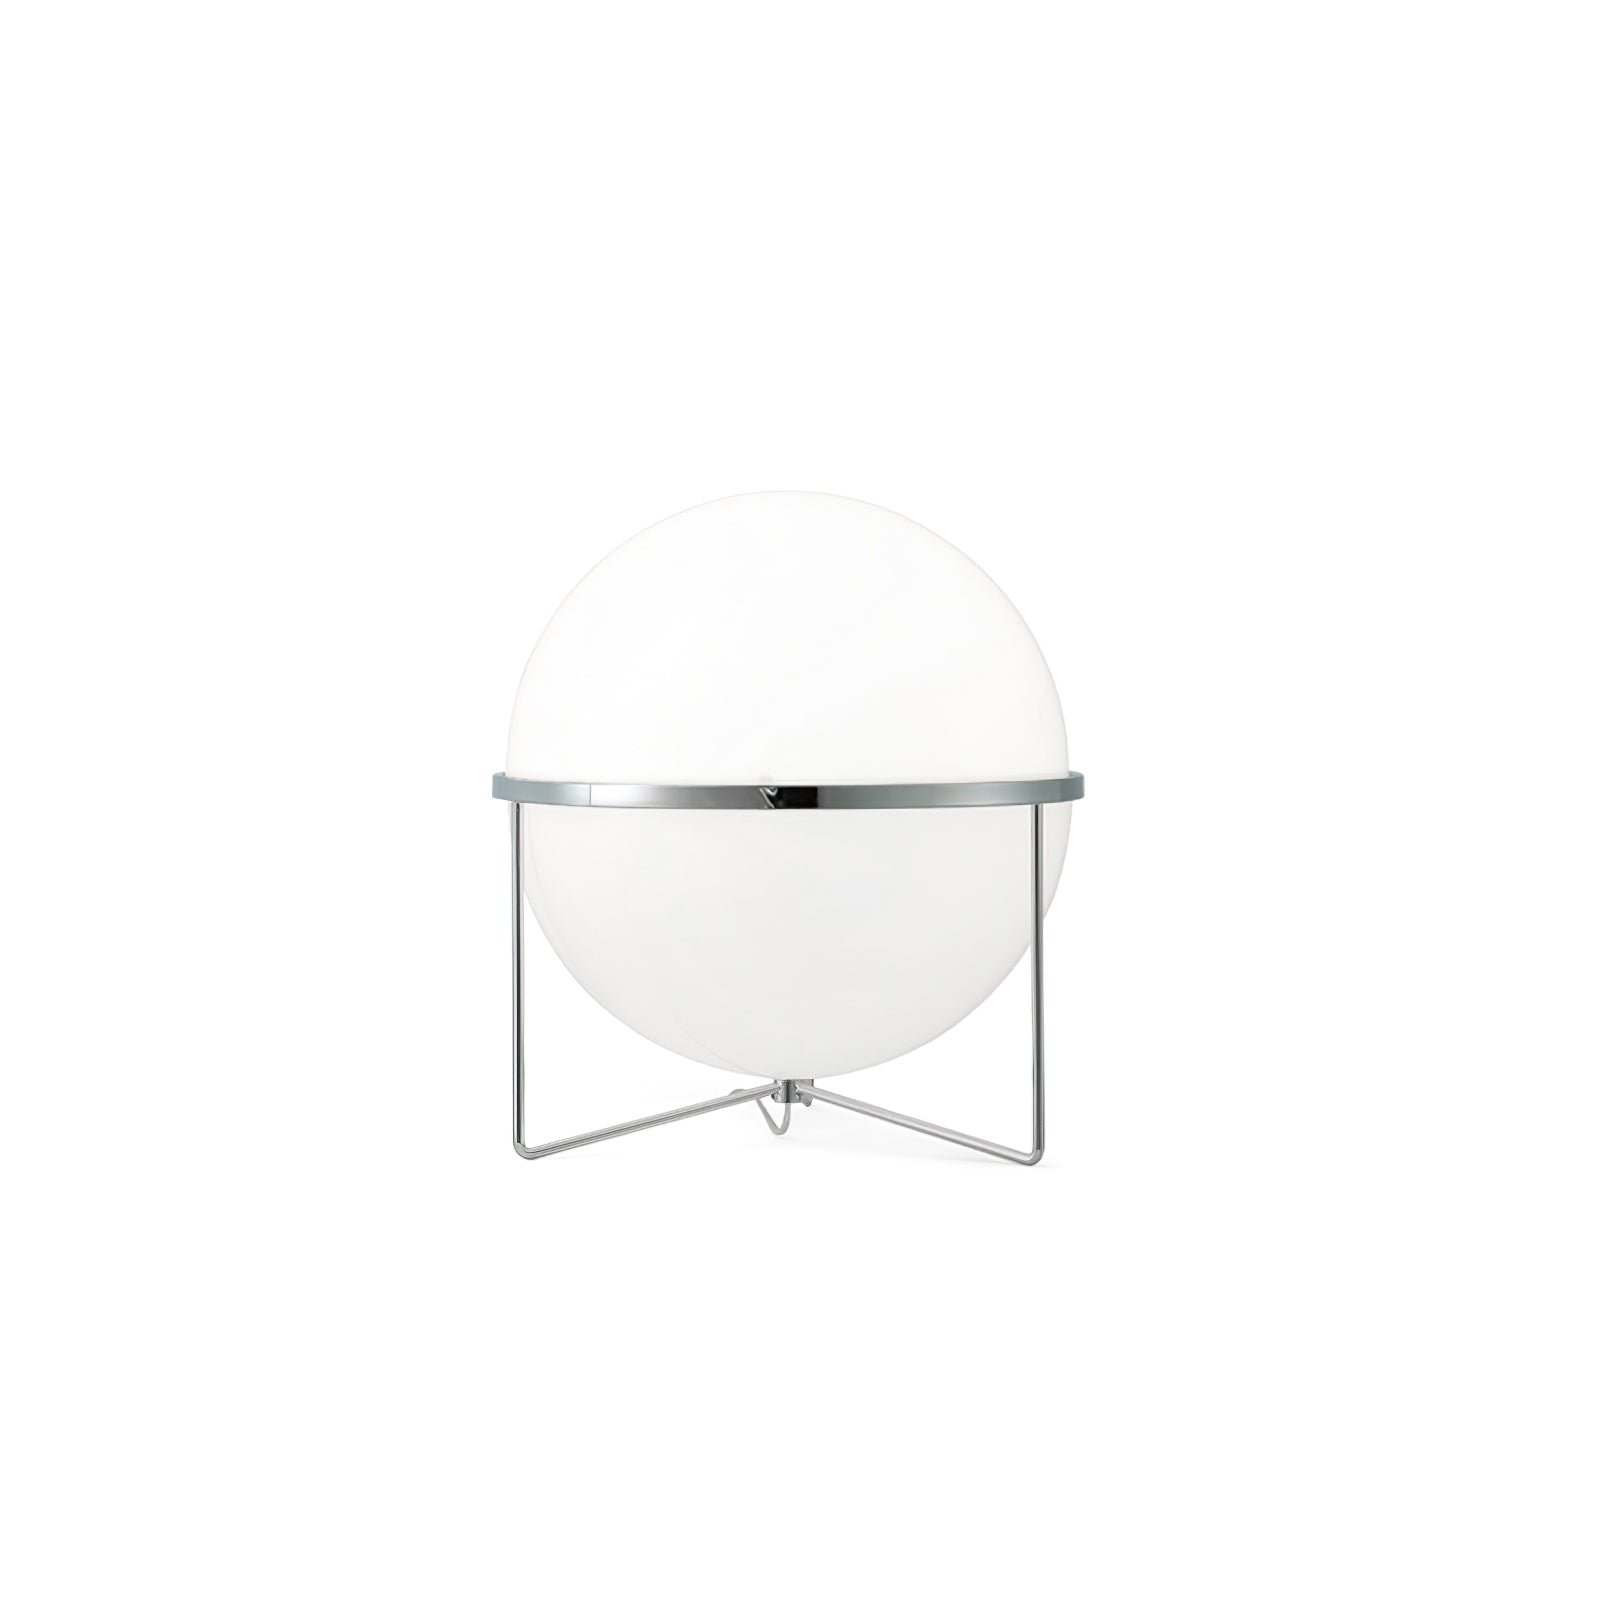 White Yolk Table Lamp with a diameter of 15.7 inches and a height of 17.7 inches (40cm x 45cm) equipped with an EU plug.